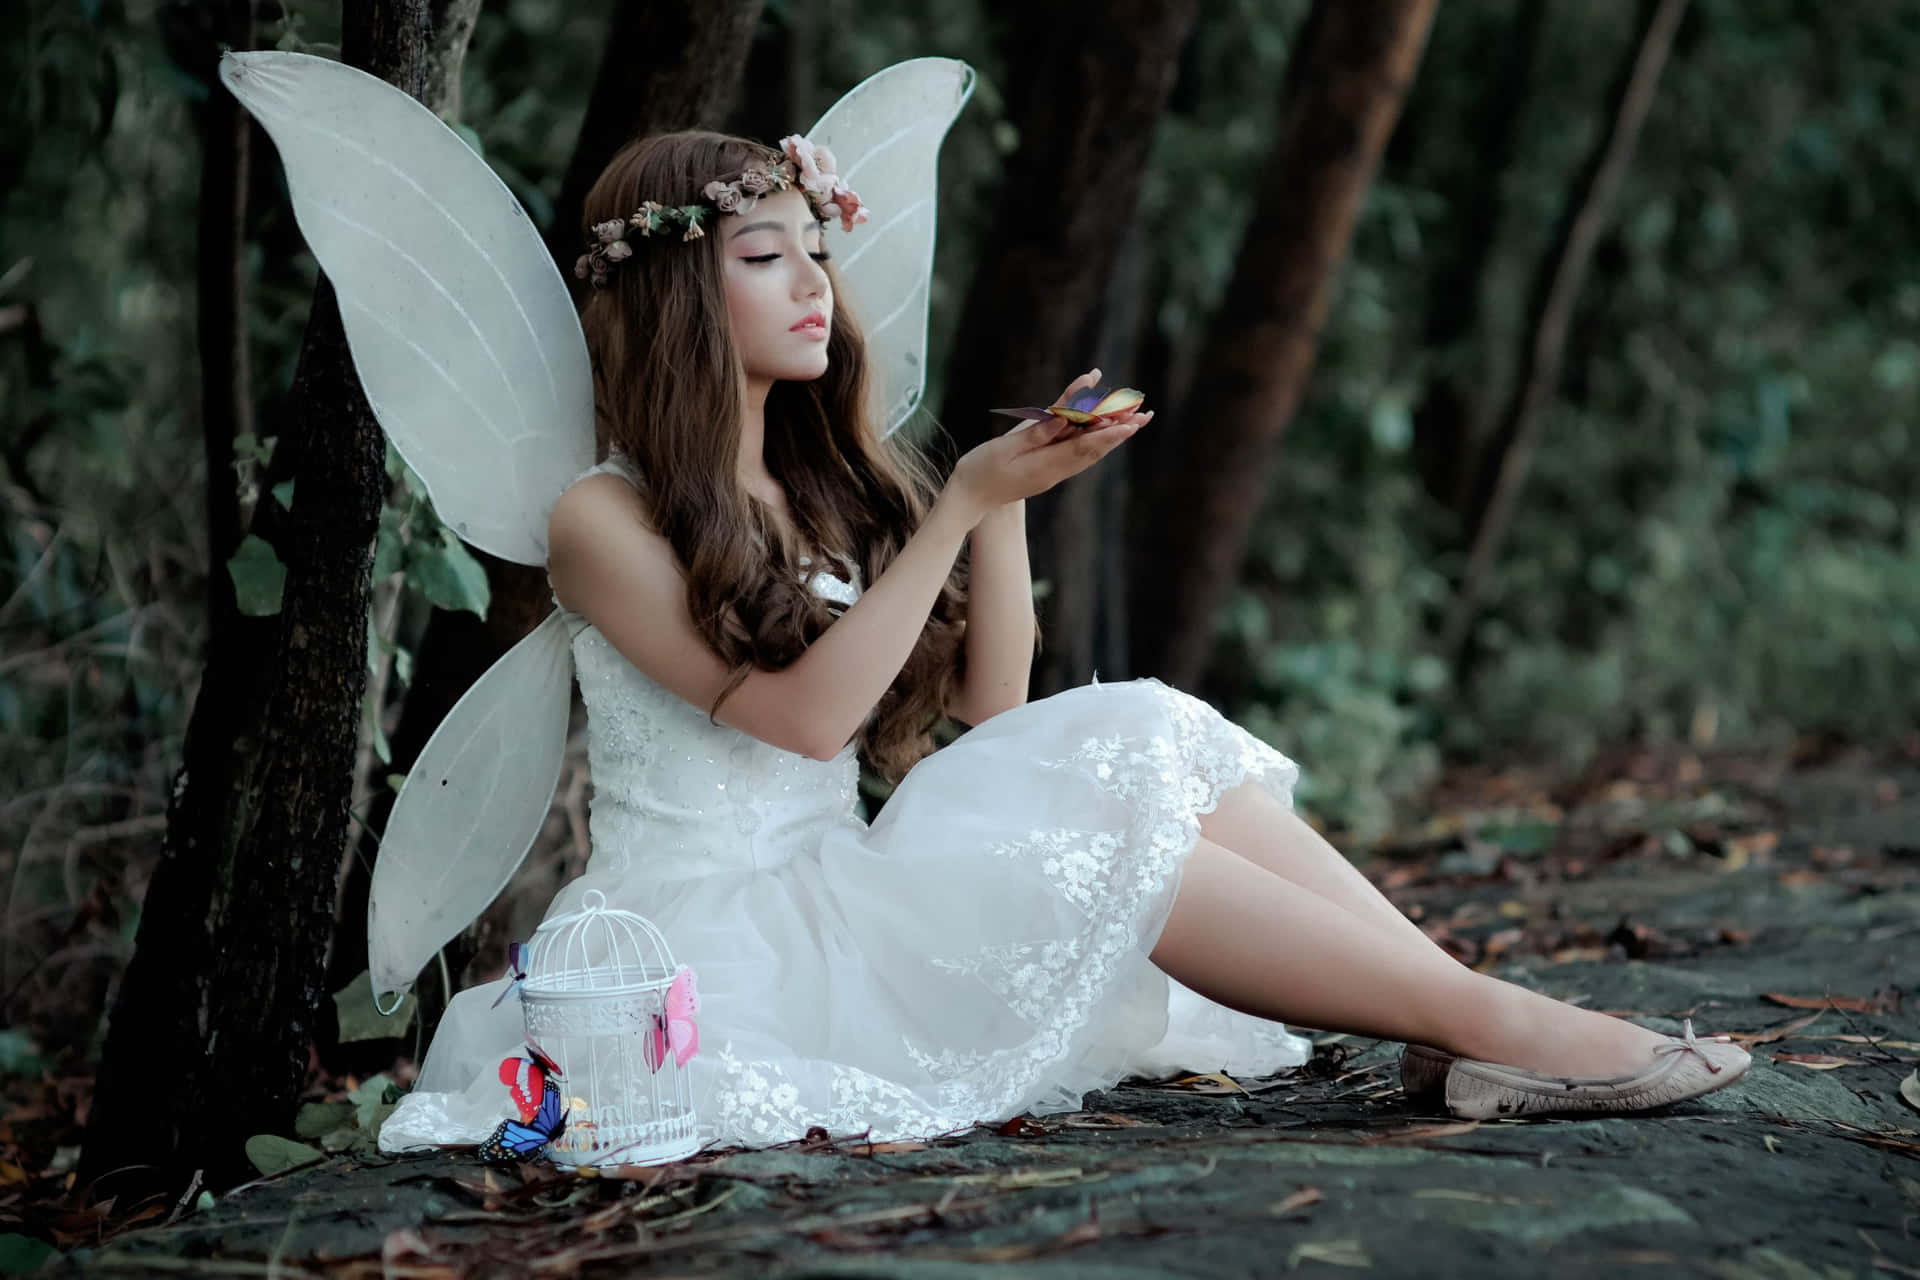 Let your imagination take you away with the beauty of a fairy aesthetic